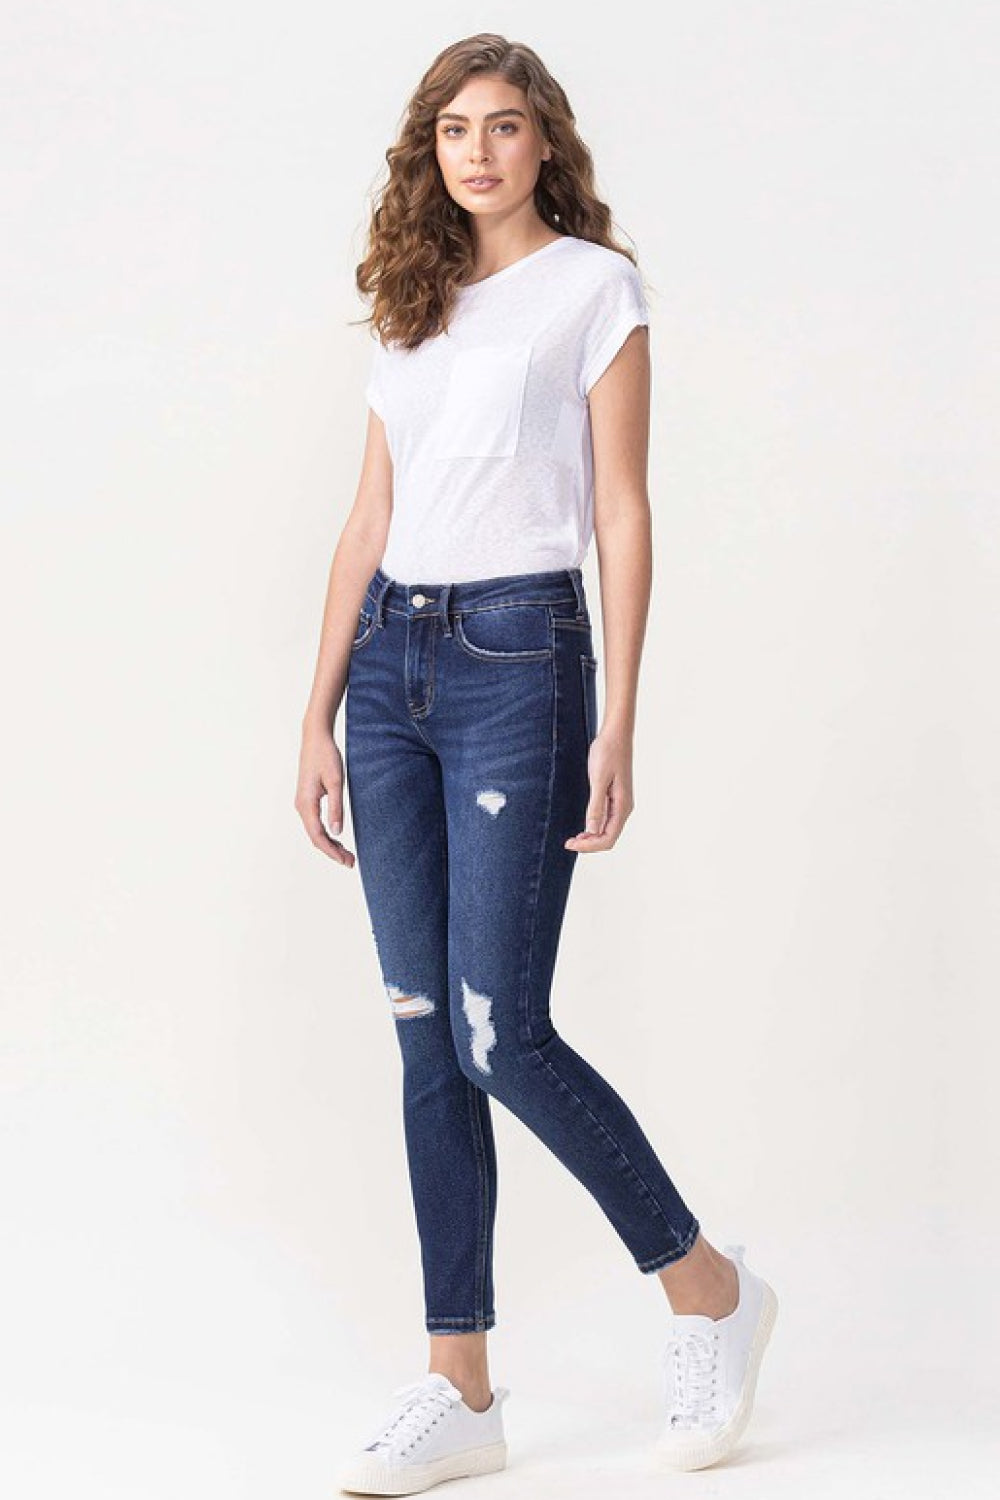 Lovervet Full Size Chelsea Midrise Crop Skinny Jeans - Jeans - FITGGINS